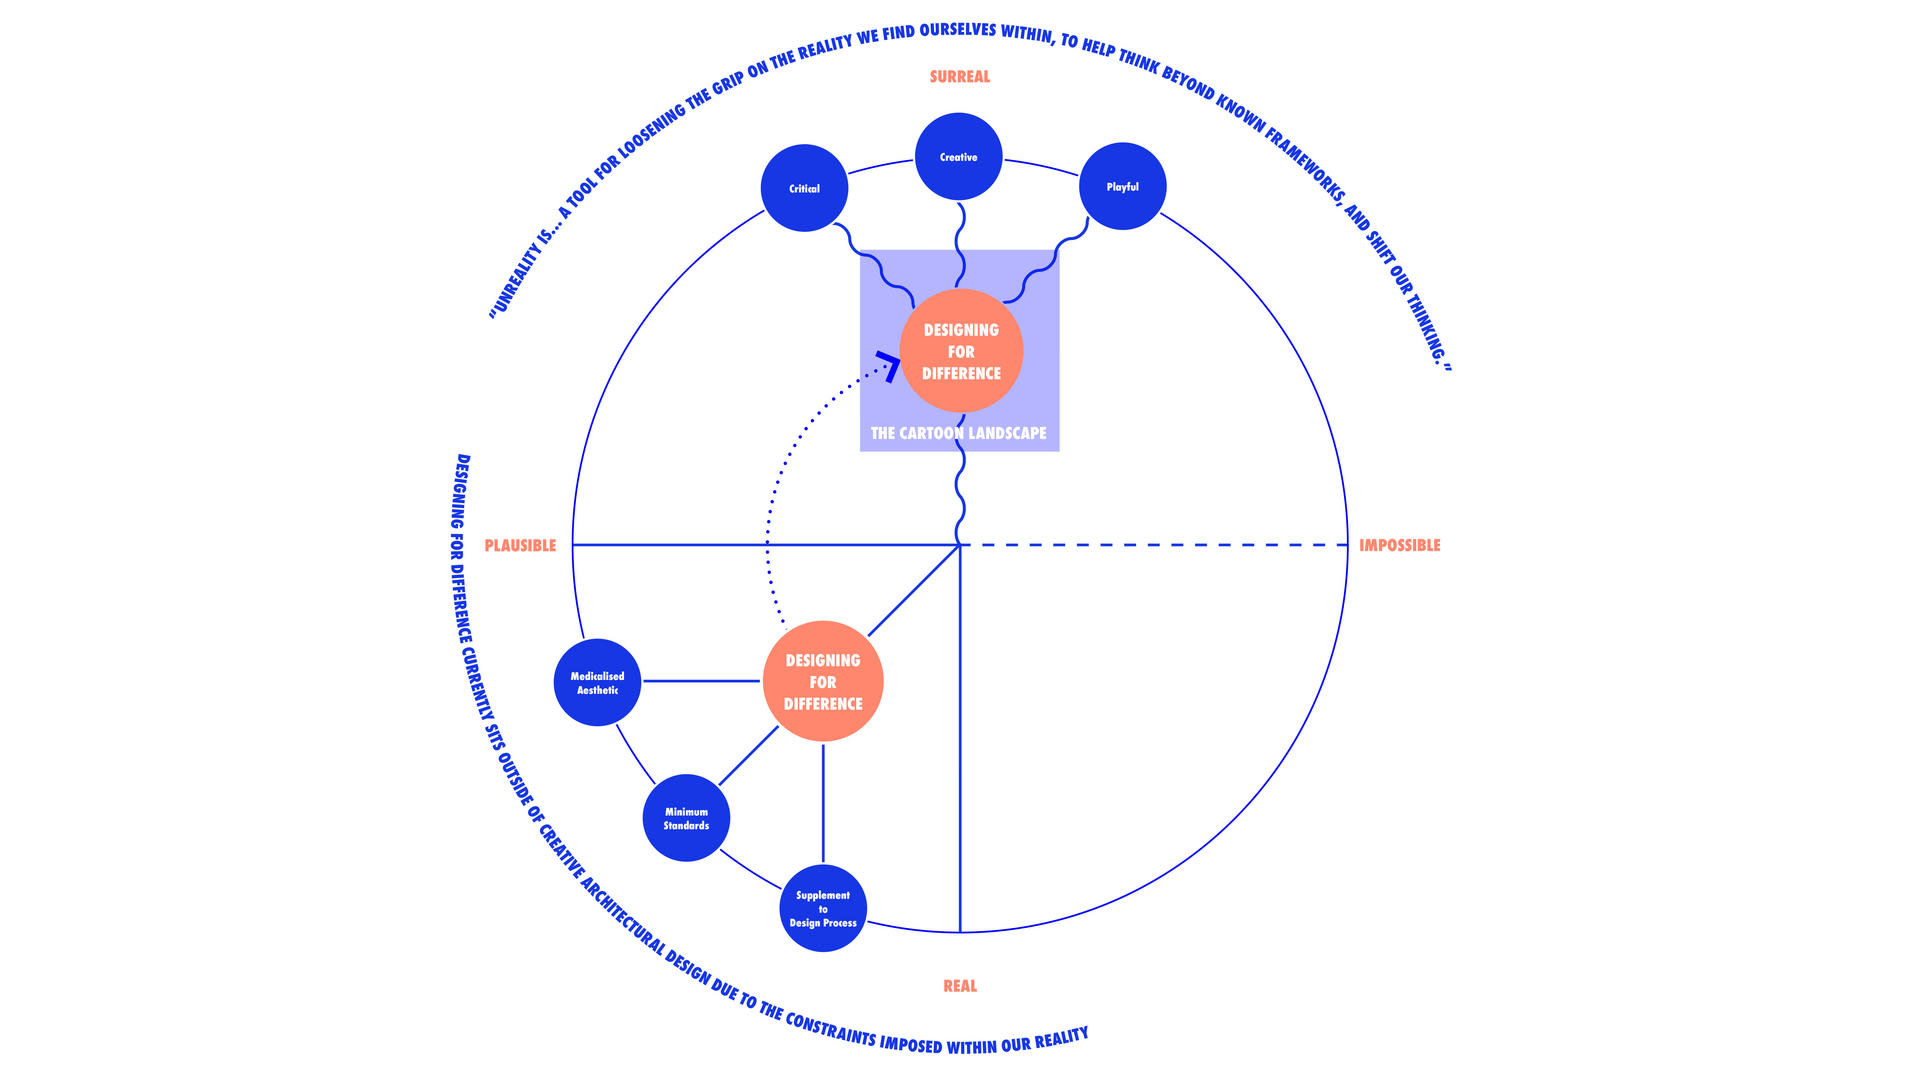 The Project Framework